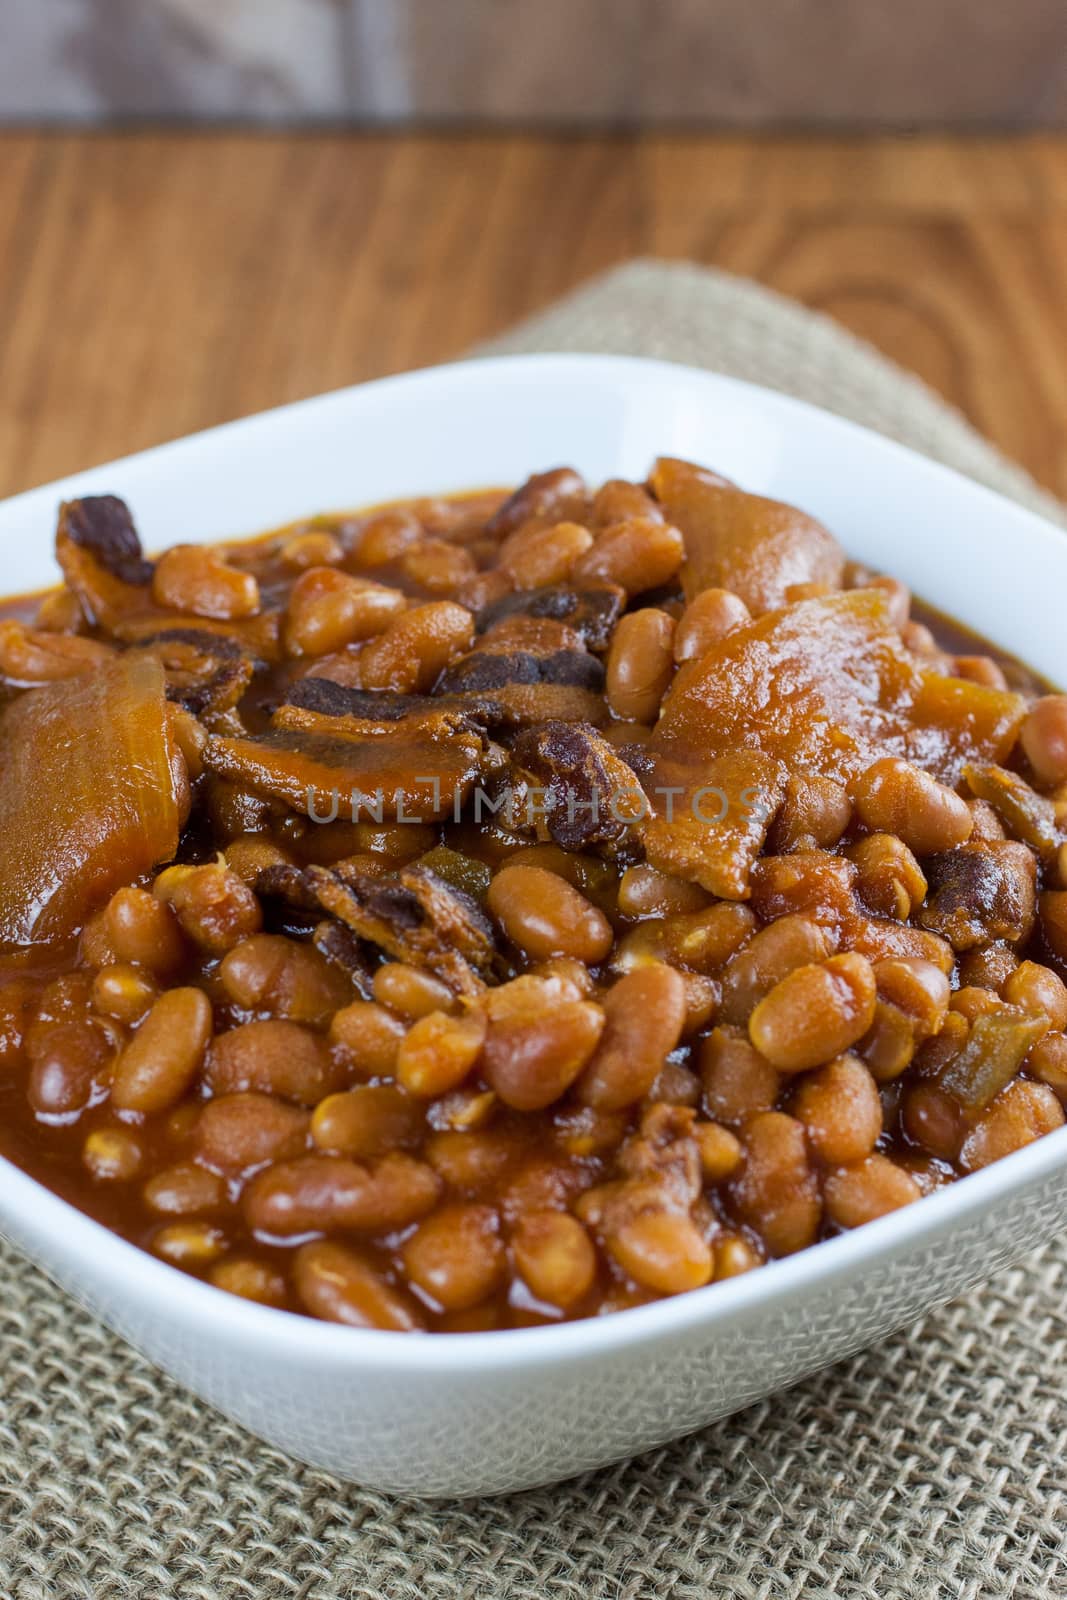 Rustic baked beans in a white bowl on a burlap placemat and wooden table.